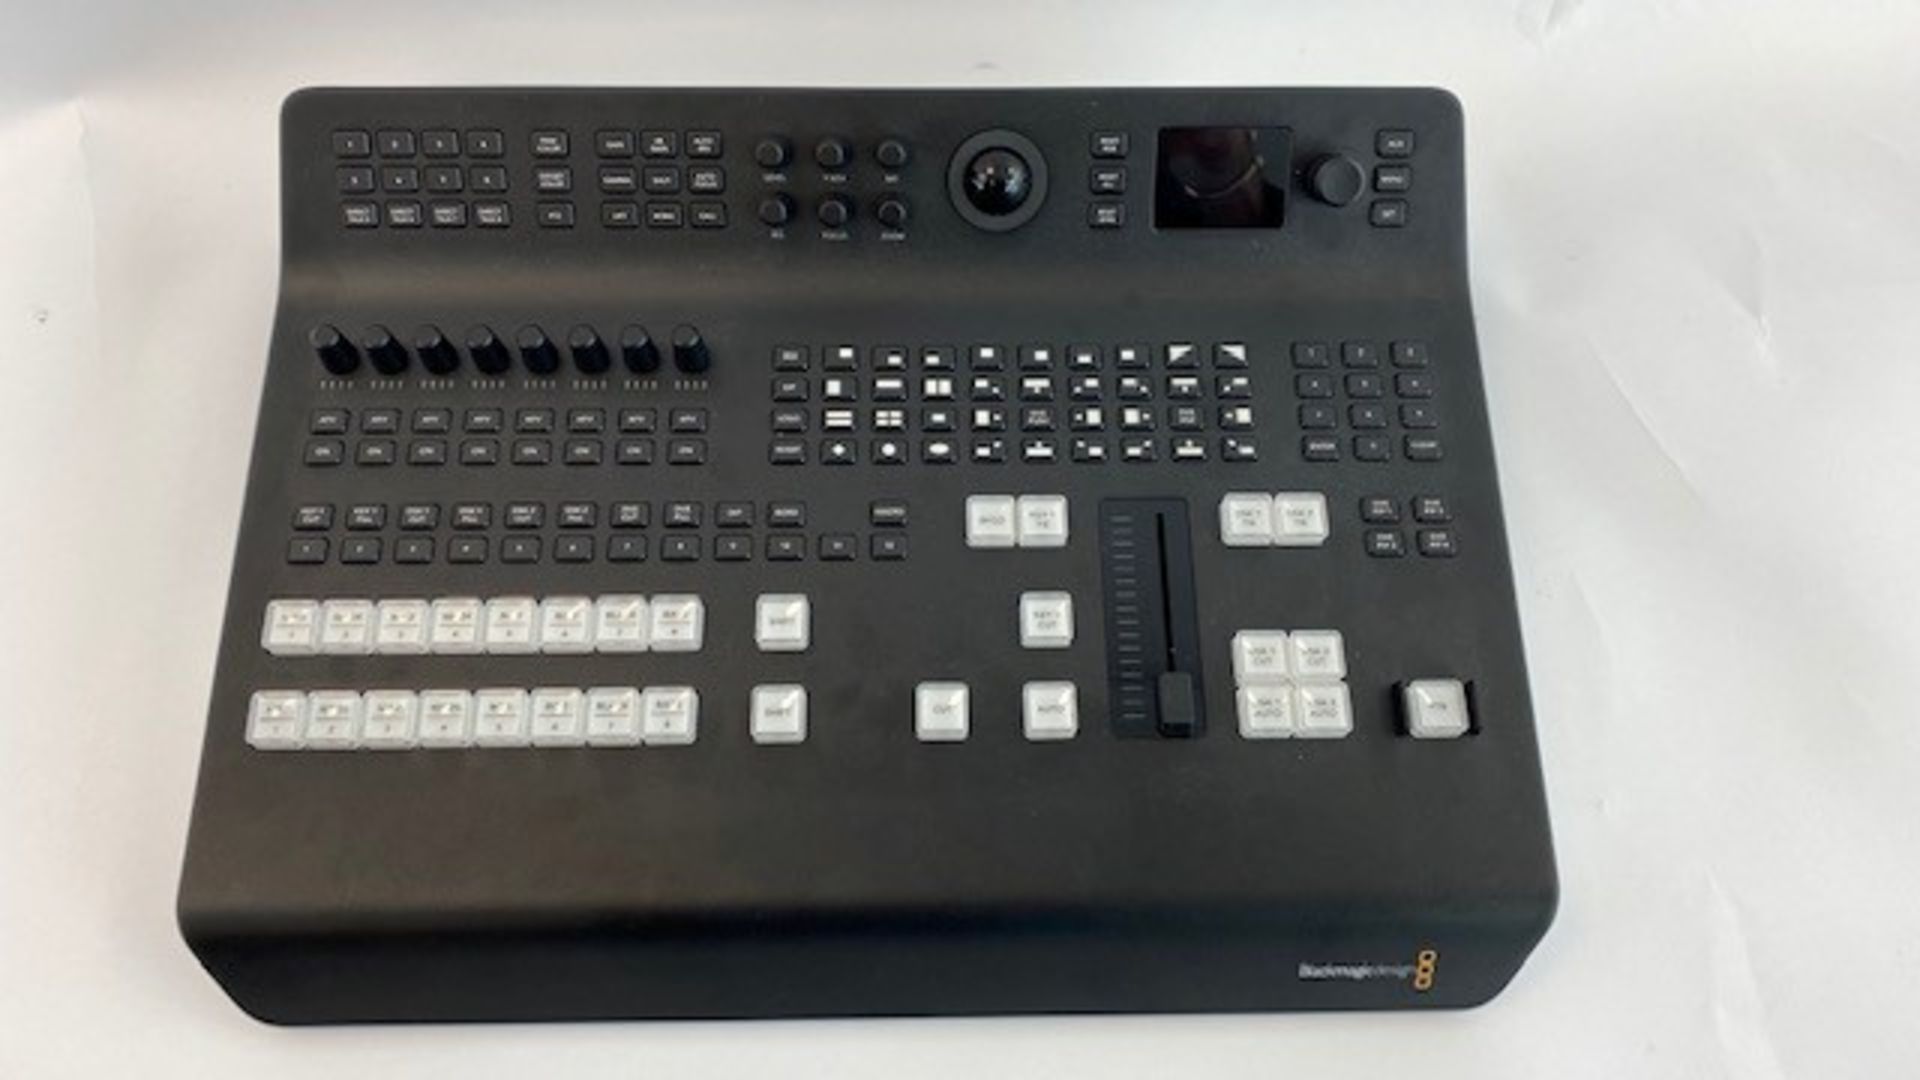 1 x ATEN Television Studio HD Pro Vision Mixer By BlackMagic - Ref: 129 - CL581 - Location: - Image 4 of 6